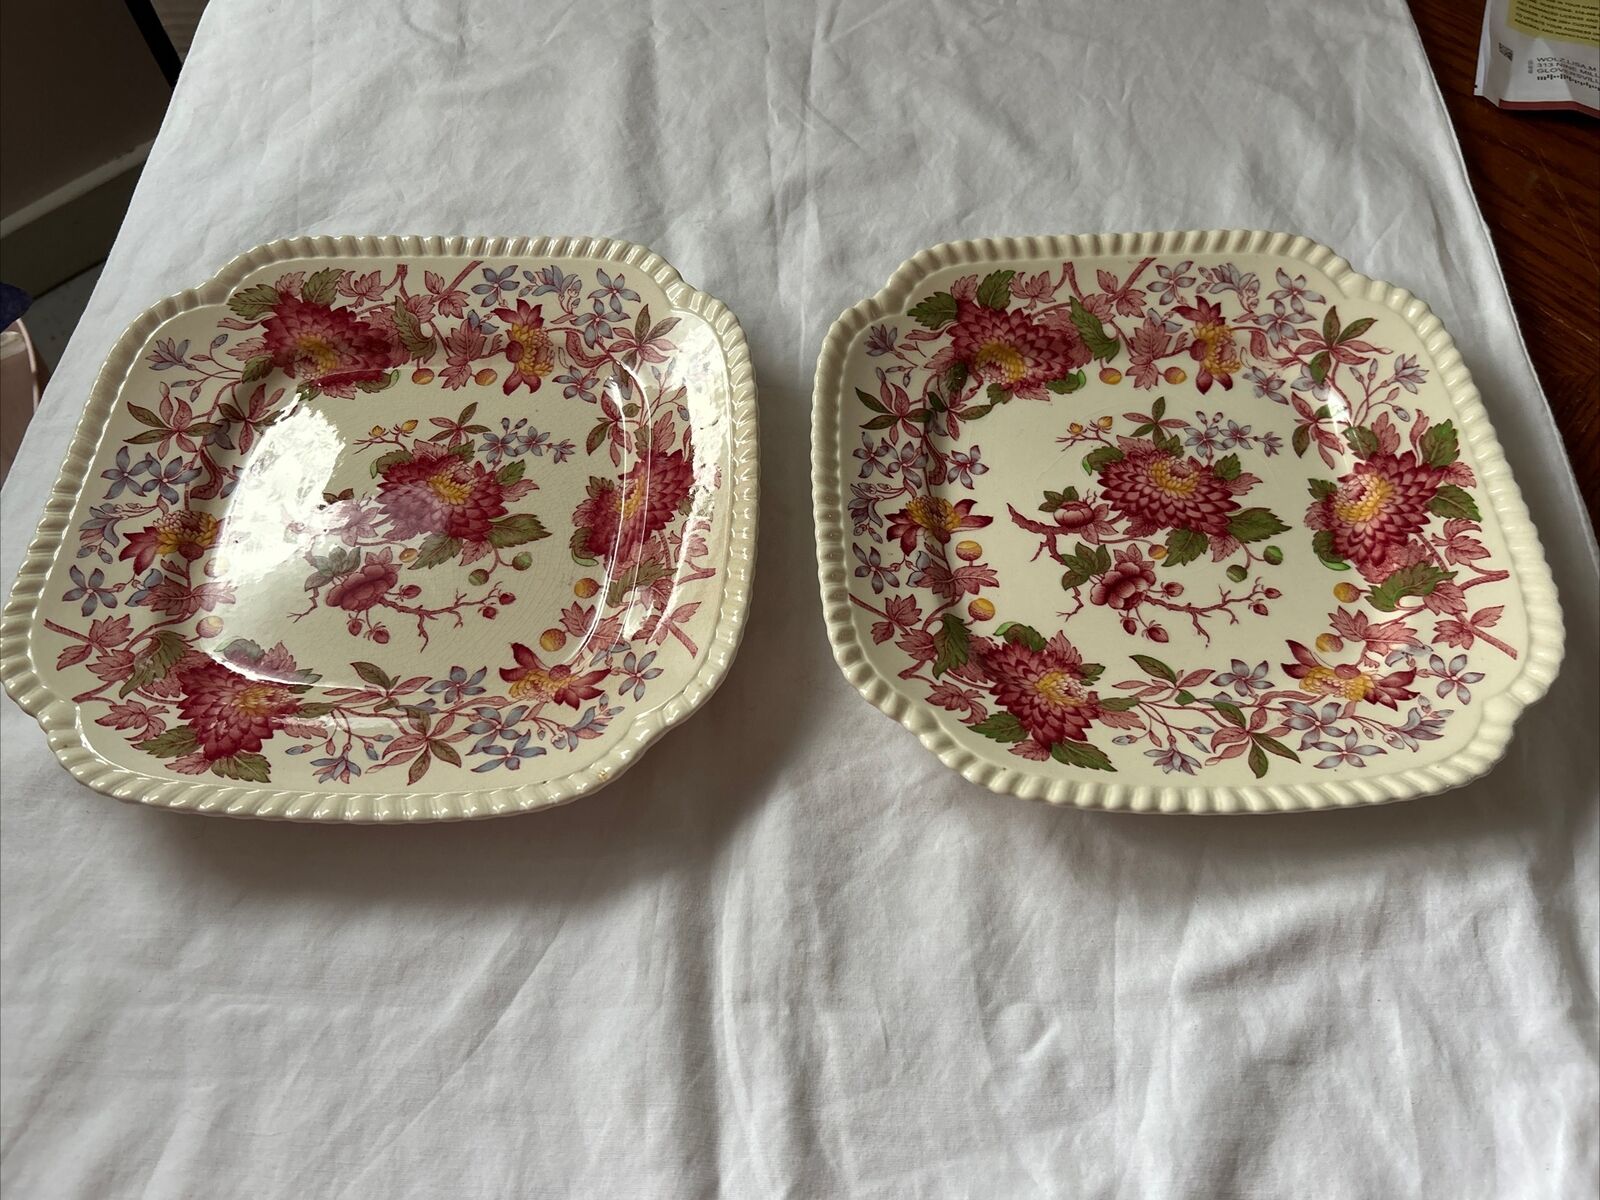 2 Vintage Copeland SPODE England Square Luncheon Plates, “Spode’s Aster” MINT